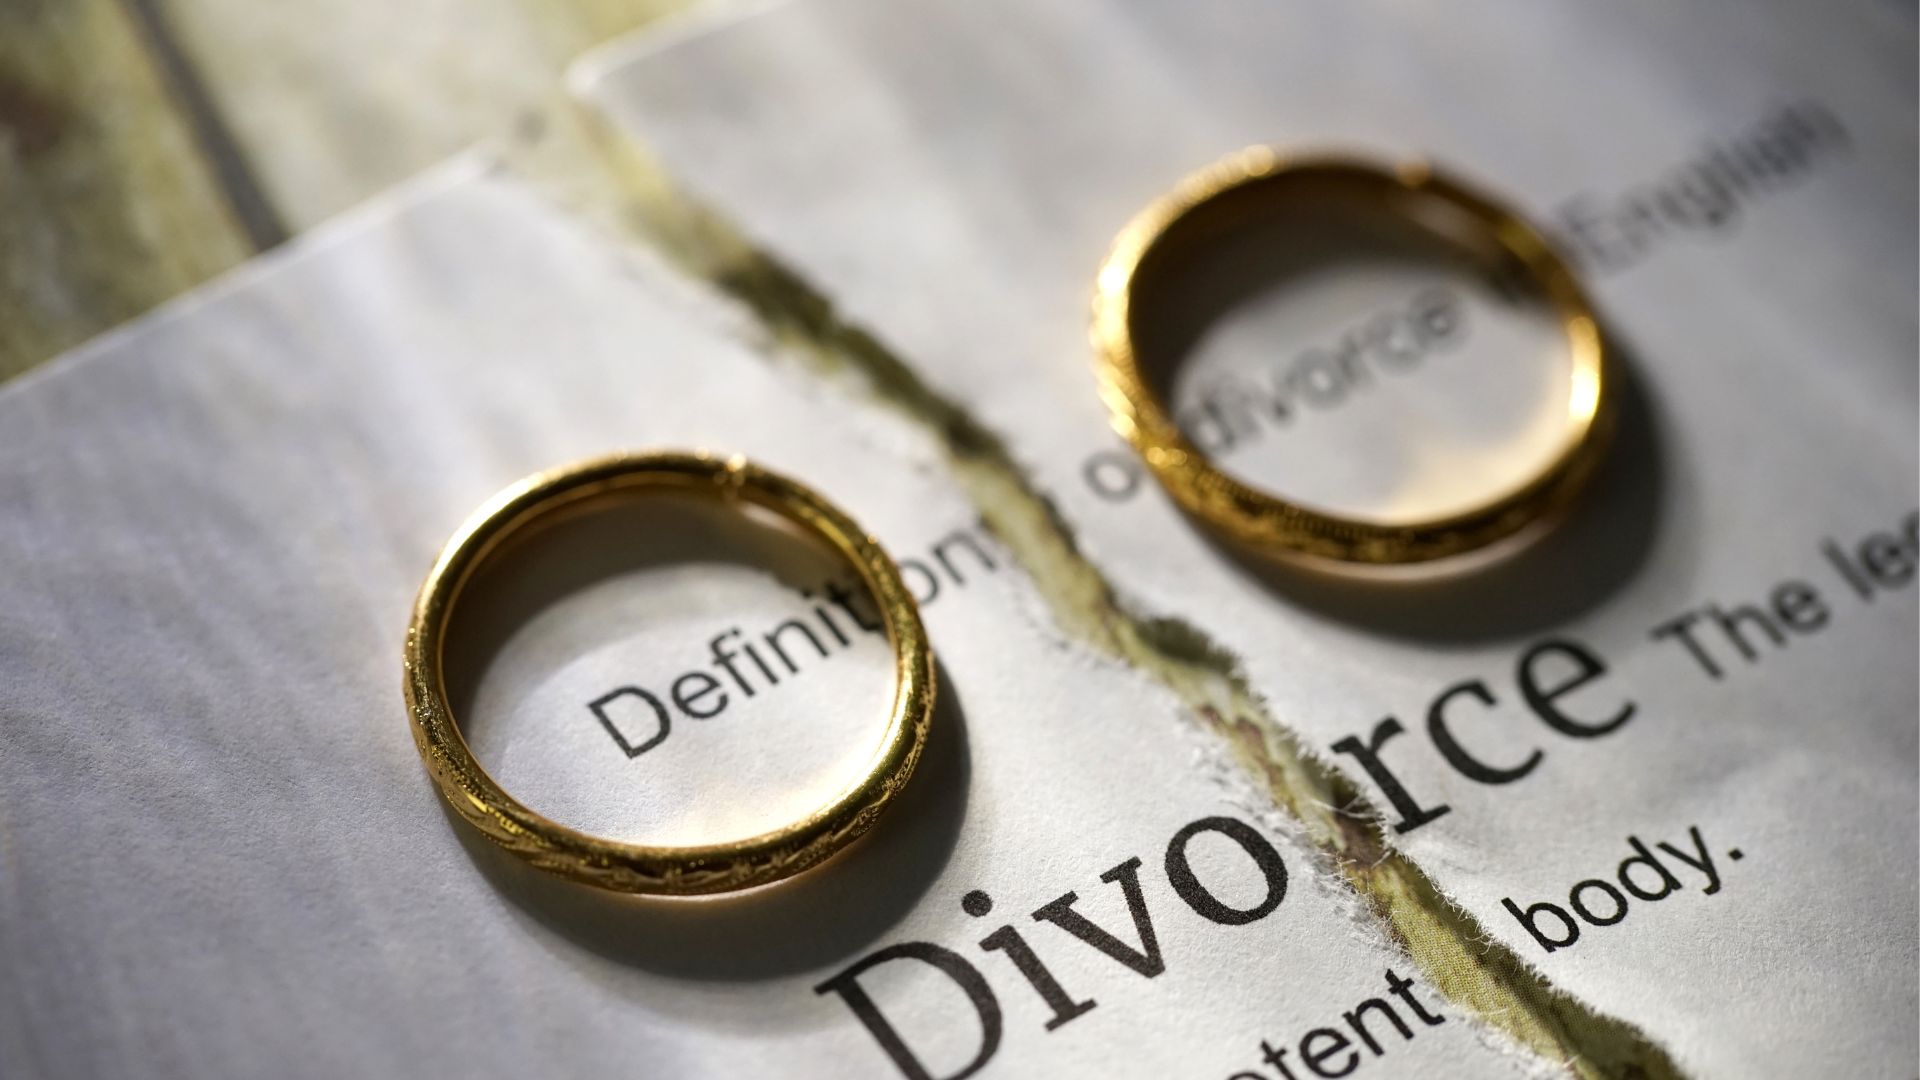 How to Get a Copy of Divorce Decree in South Africa